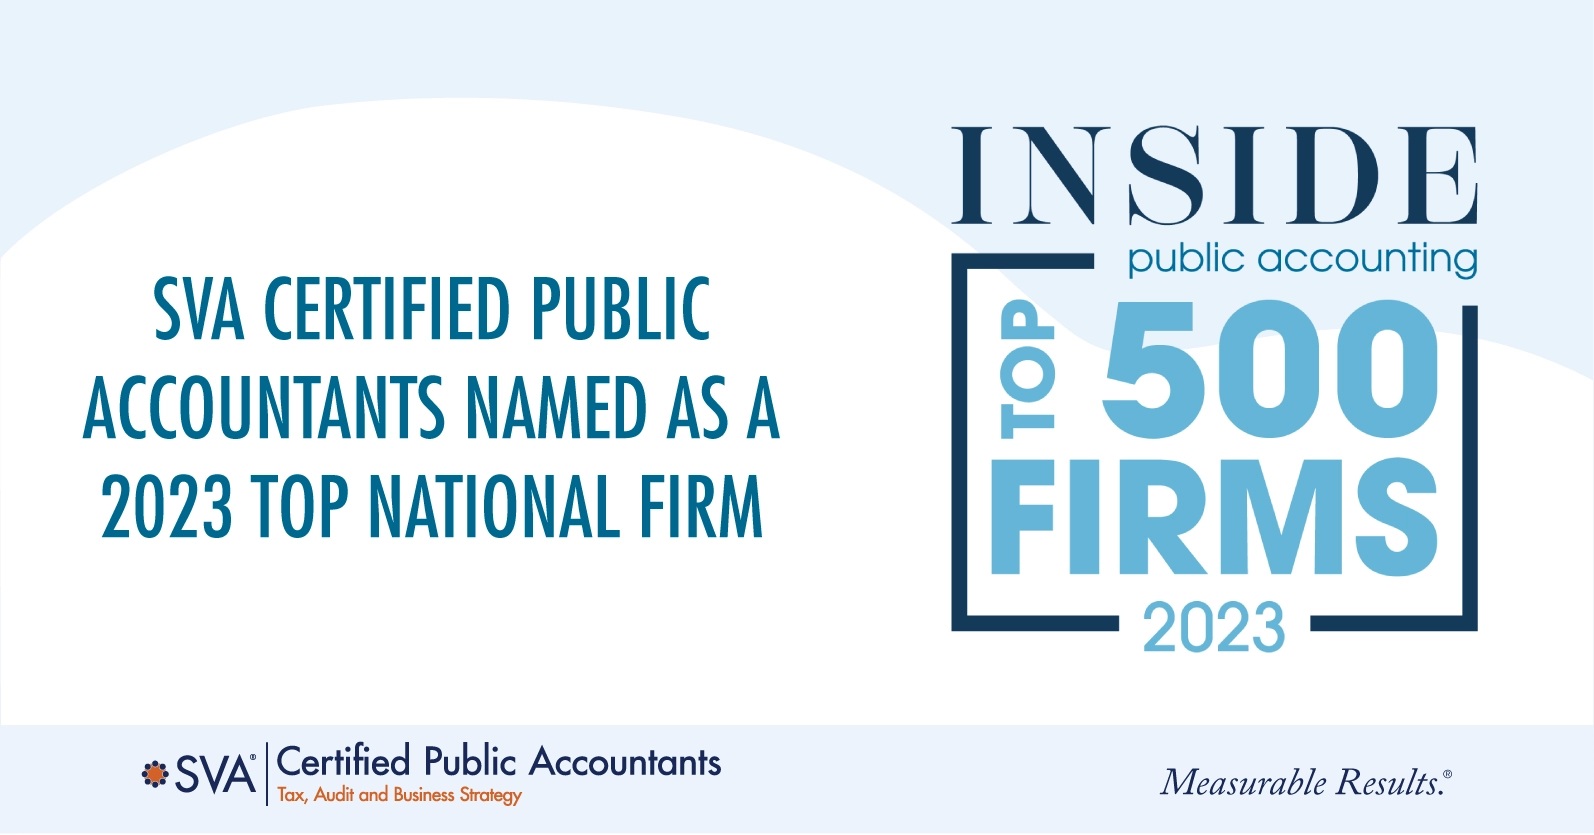 SVA Certified Public Accountants Named as a 2023 Top National Firm